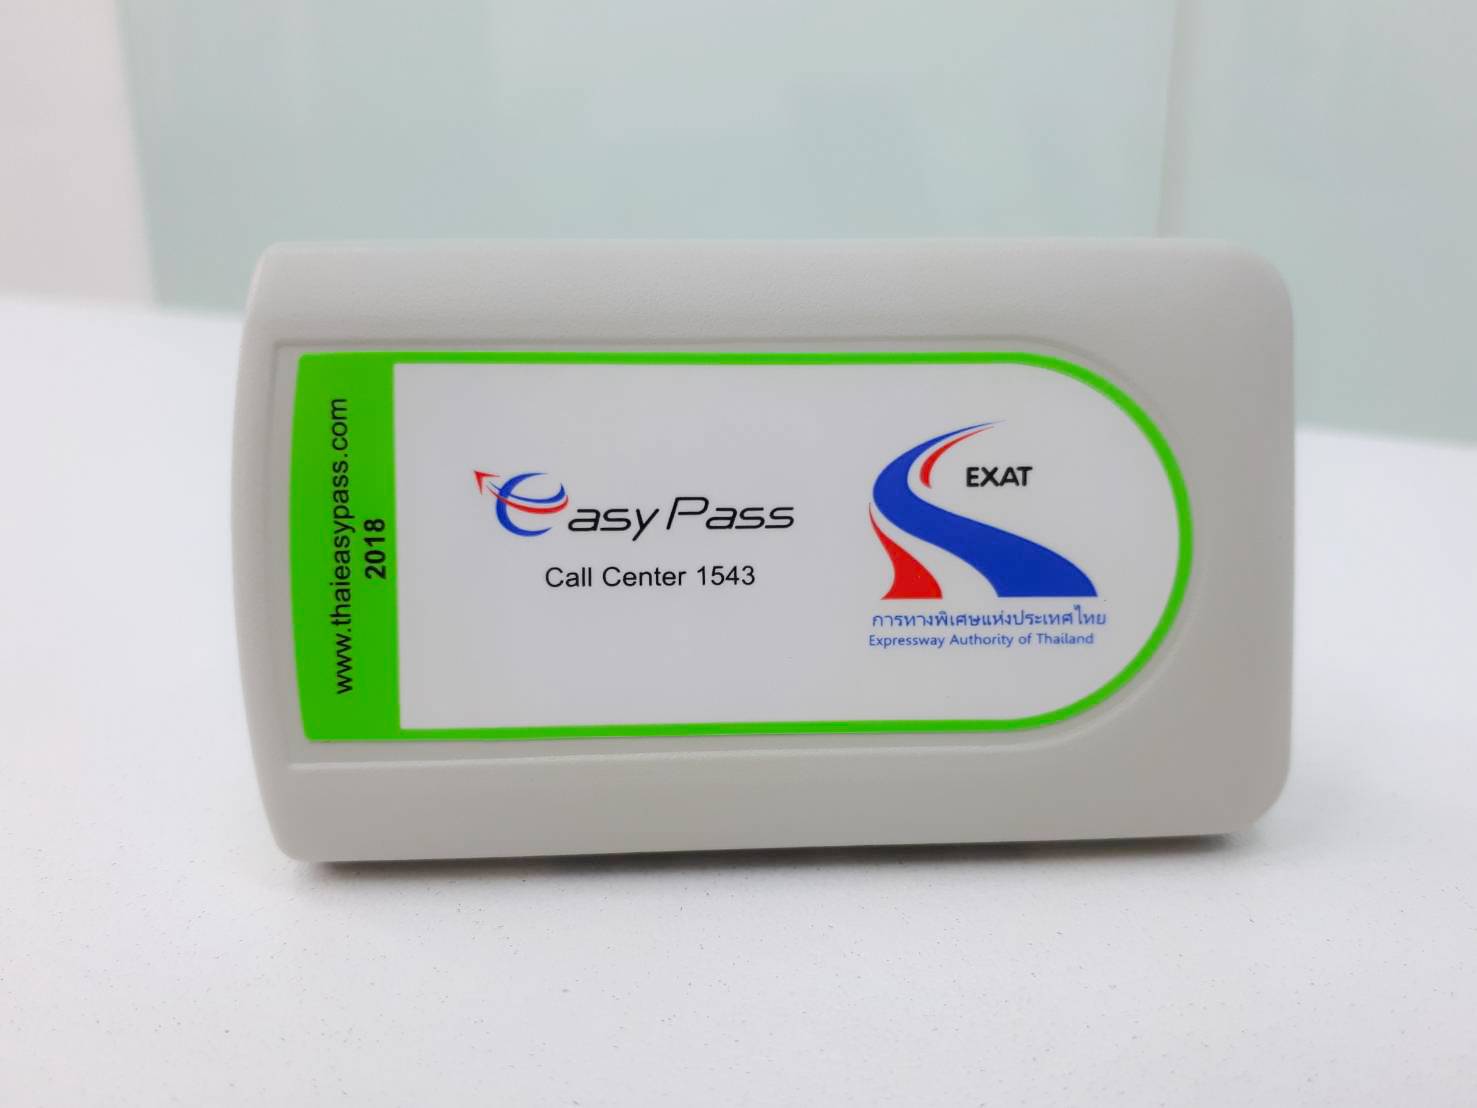 where to get easy pass near me